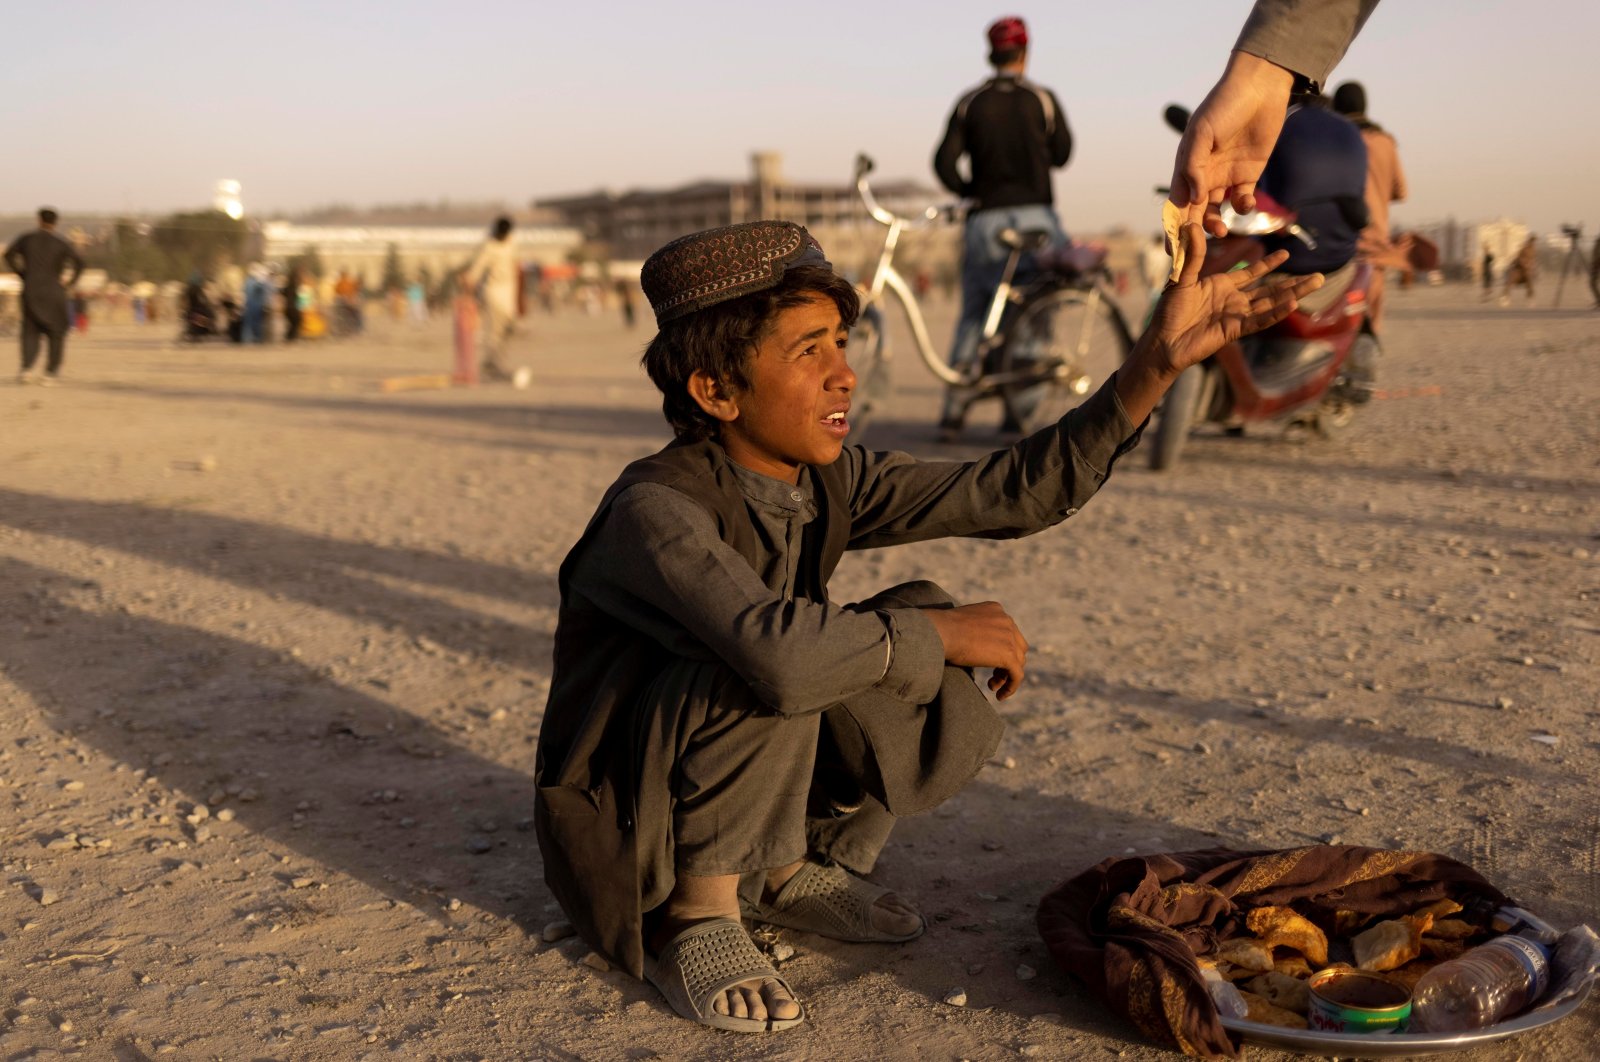 A boy sells food in a park in Kabul, Afghanistan, Oct. 22, 2021. (Reuters Photo)